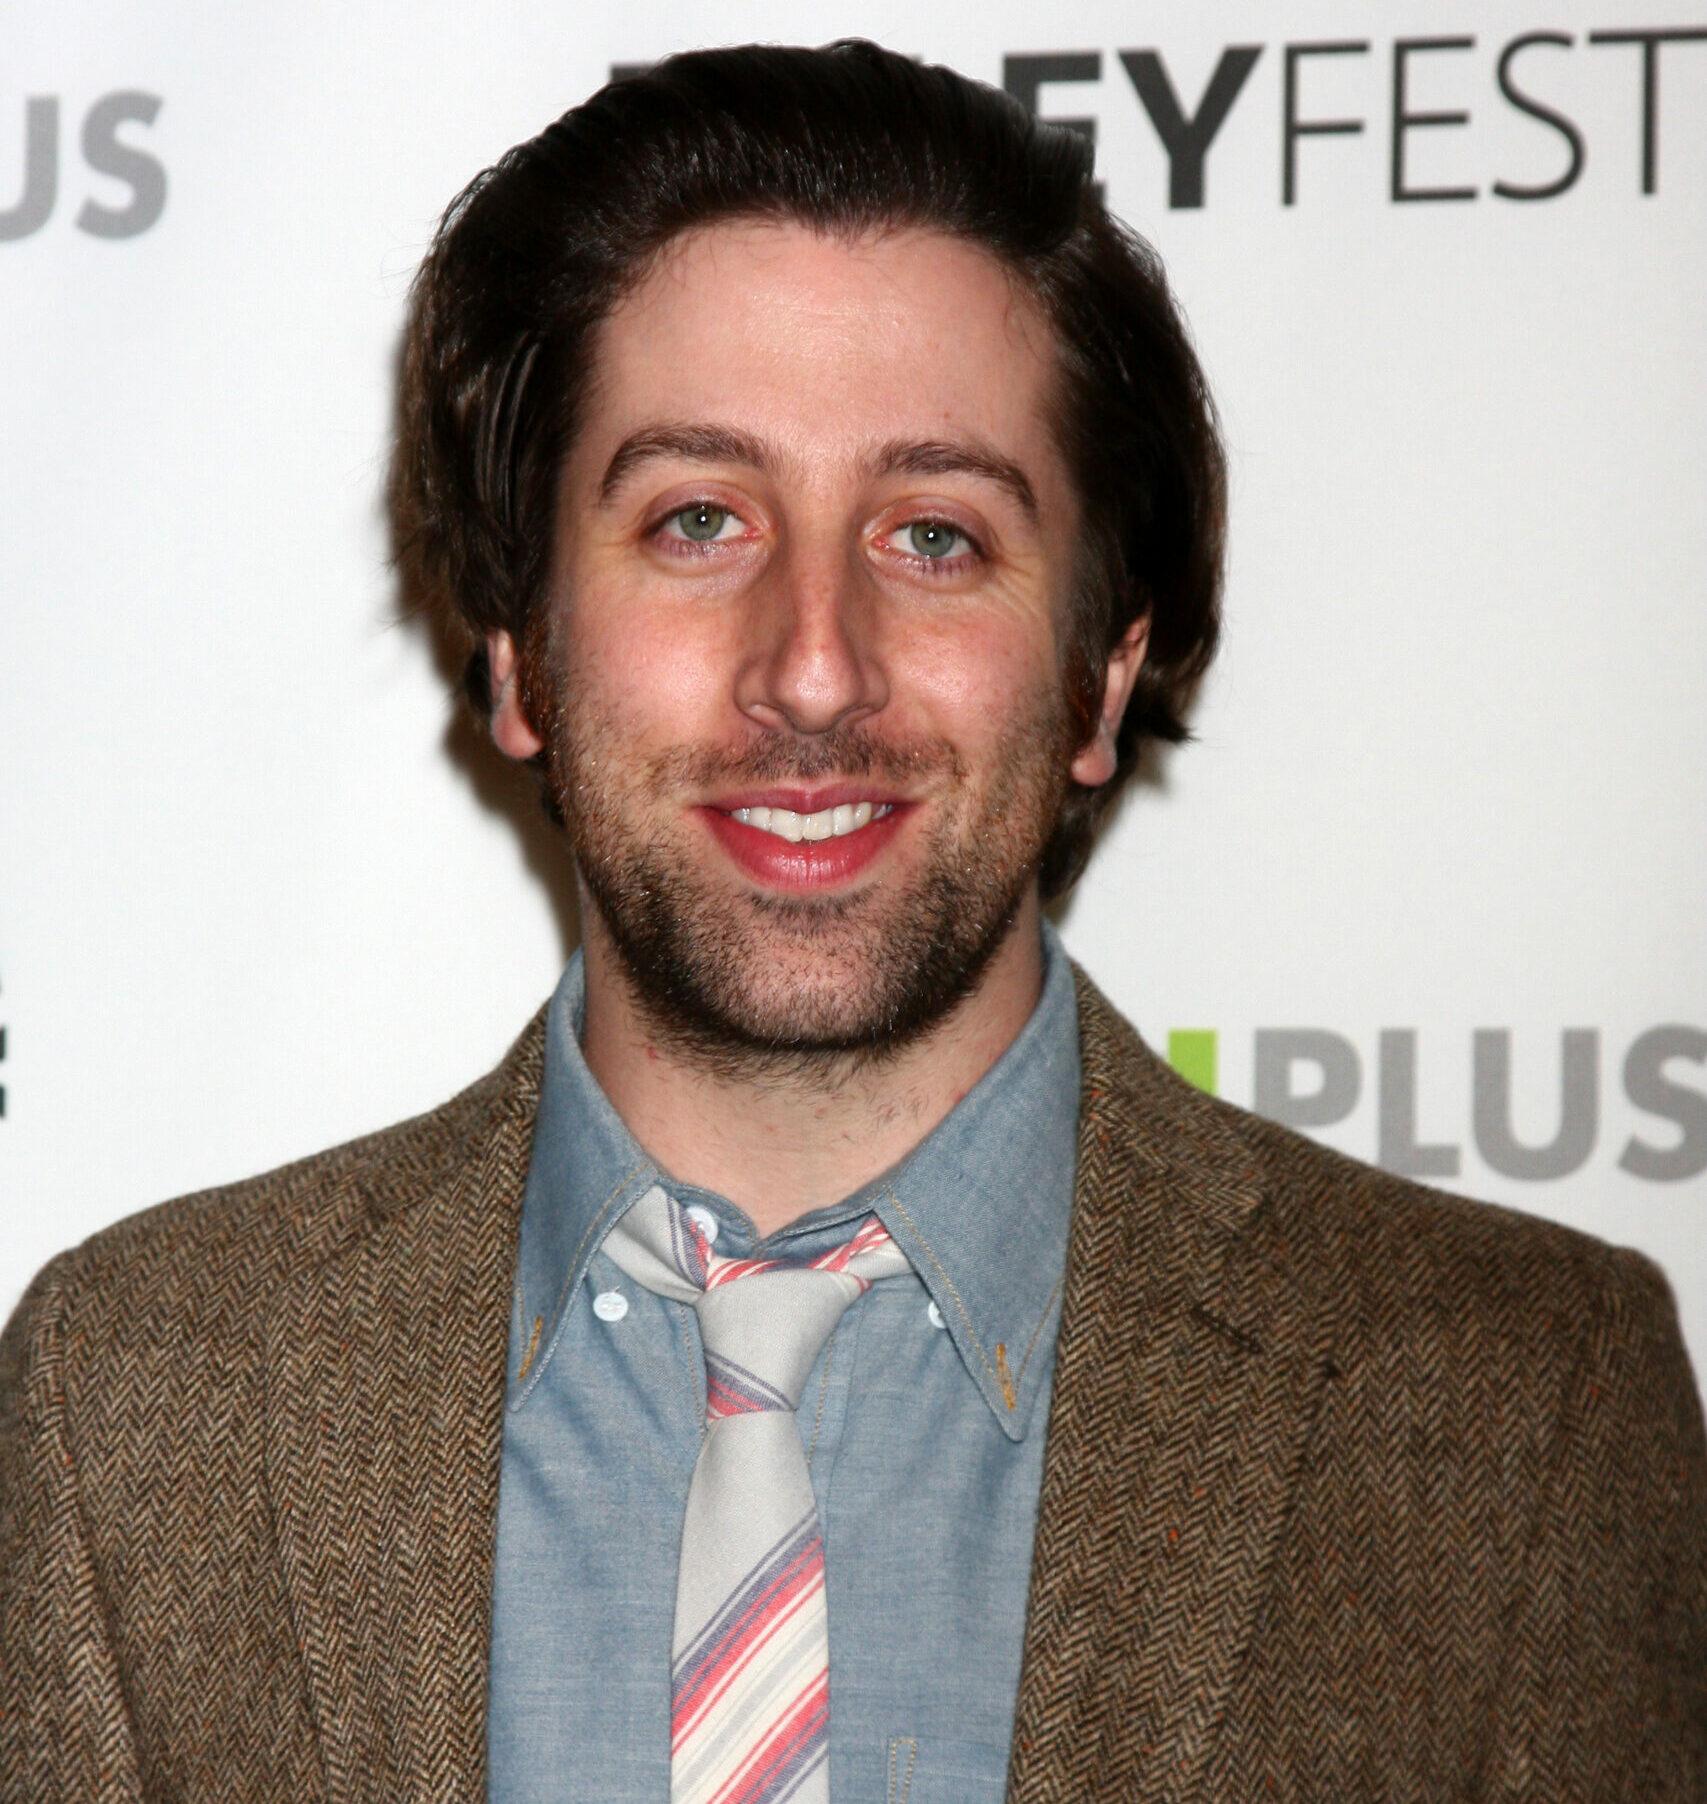 Simon Helberg arrives at the "Big Bang Theory" PaleyFEST Event at the Saban Theater on March 13, 2013 in Los Angeles, CA